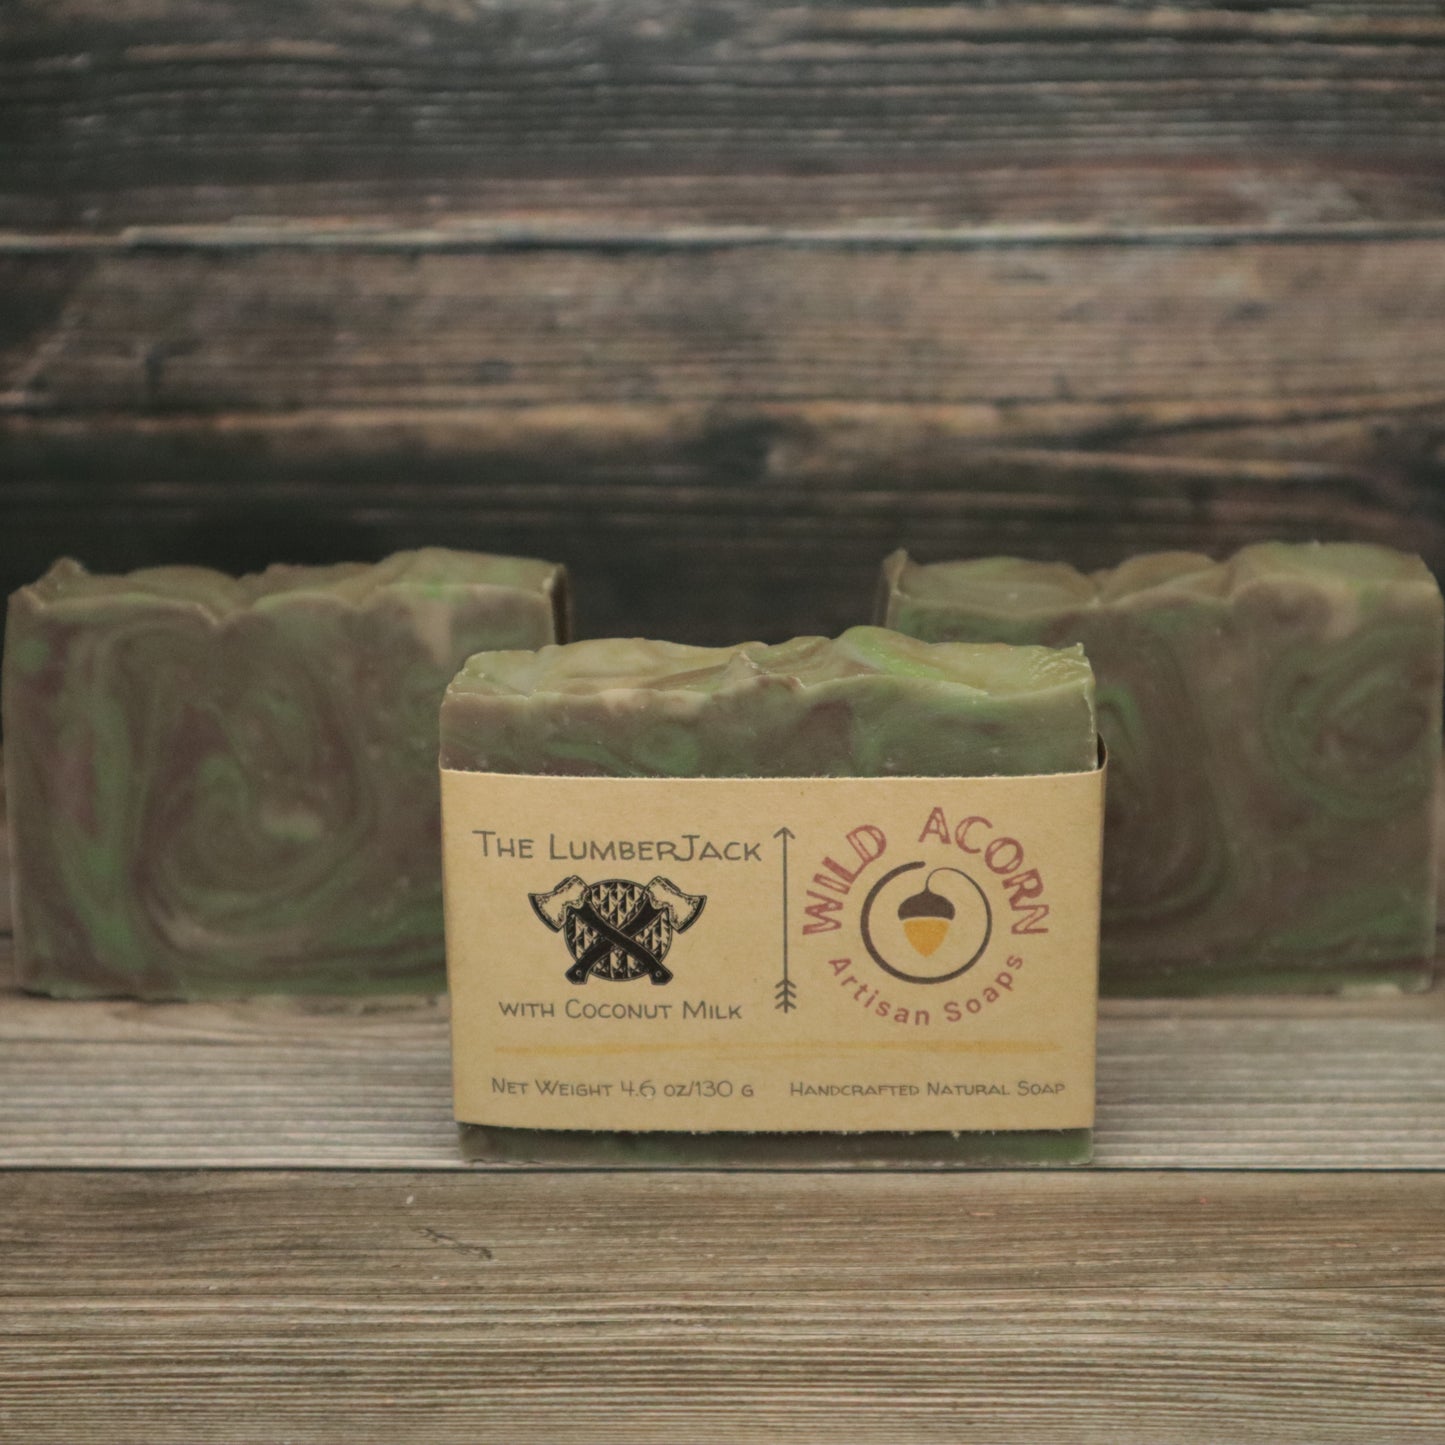 The LumberJack Soap with Coconut Milk